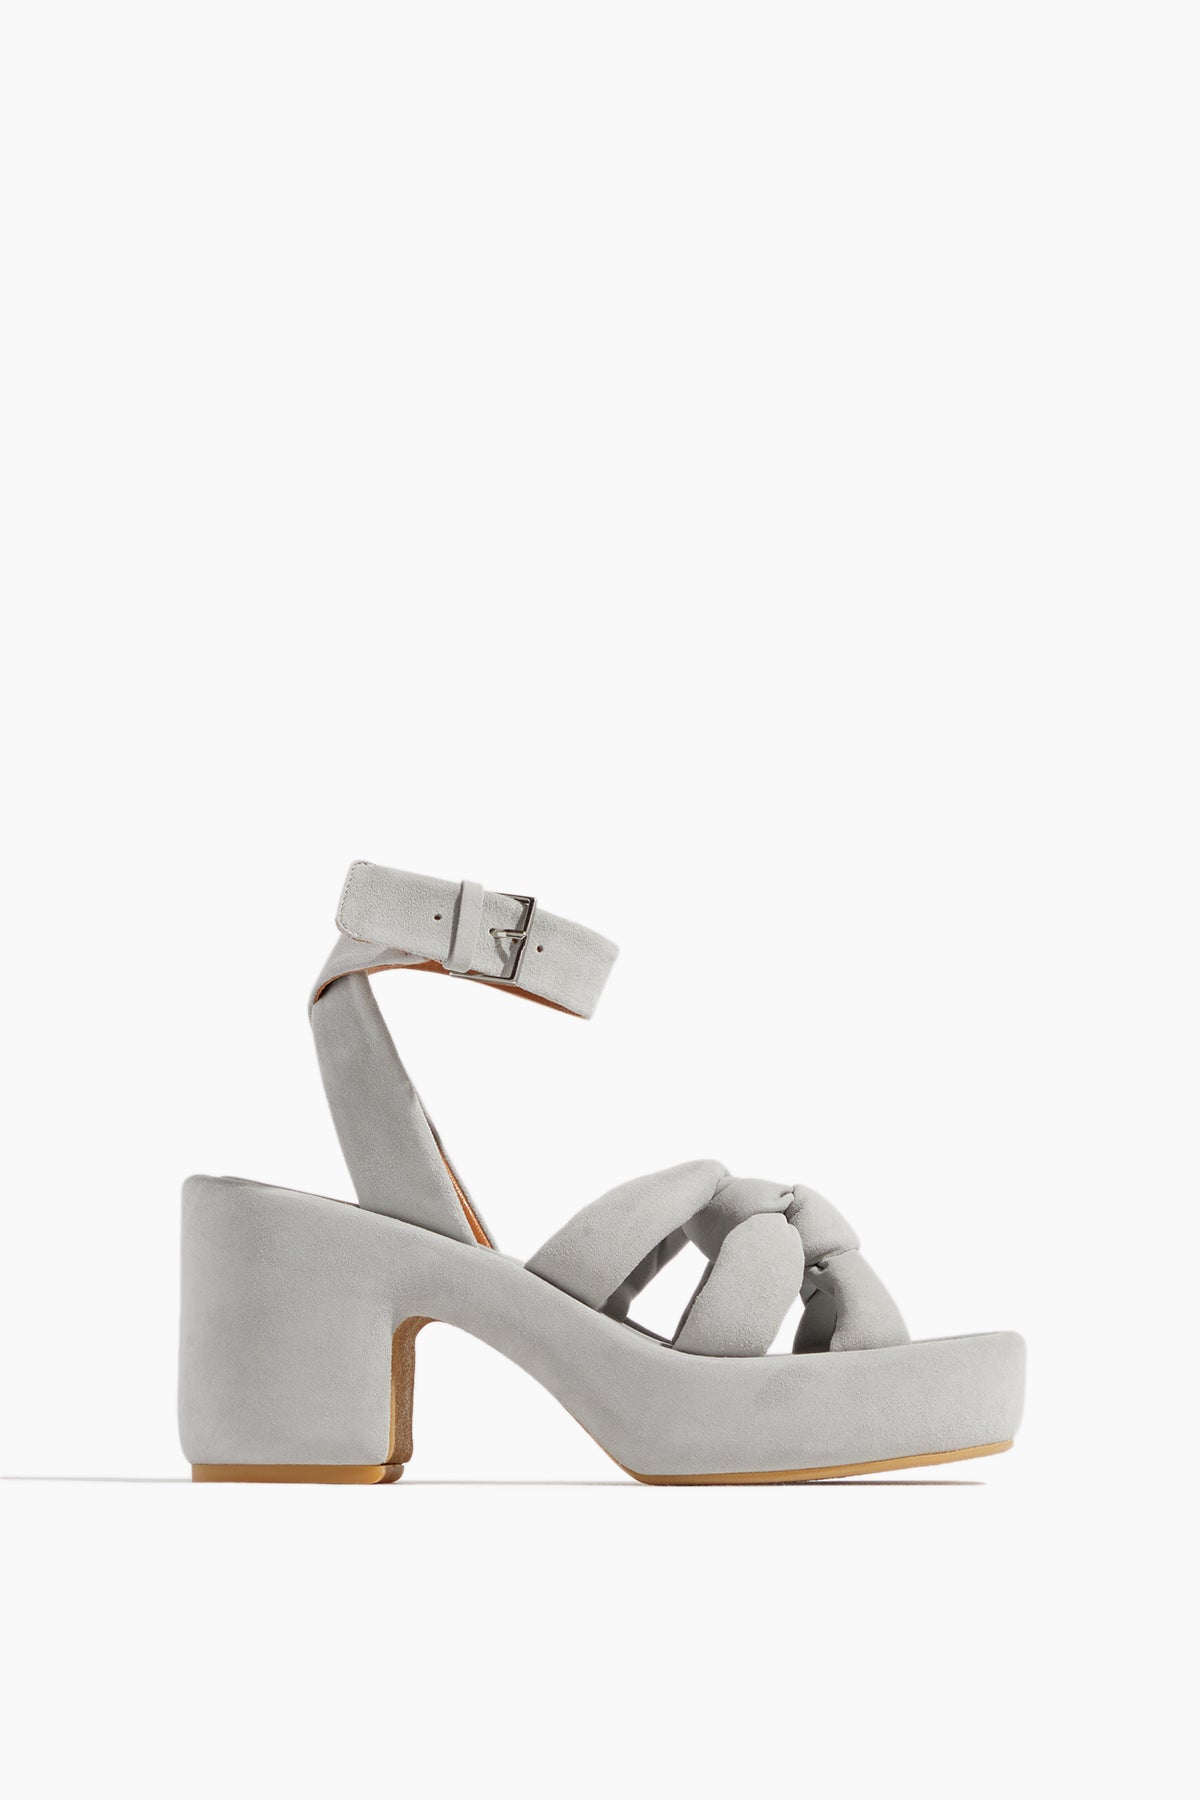 Clergerie Dayna Sandals in Grey - Grey - Size: 40.5 / 10 US